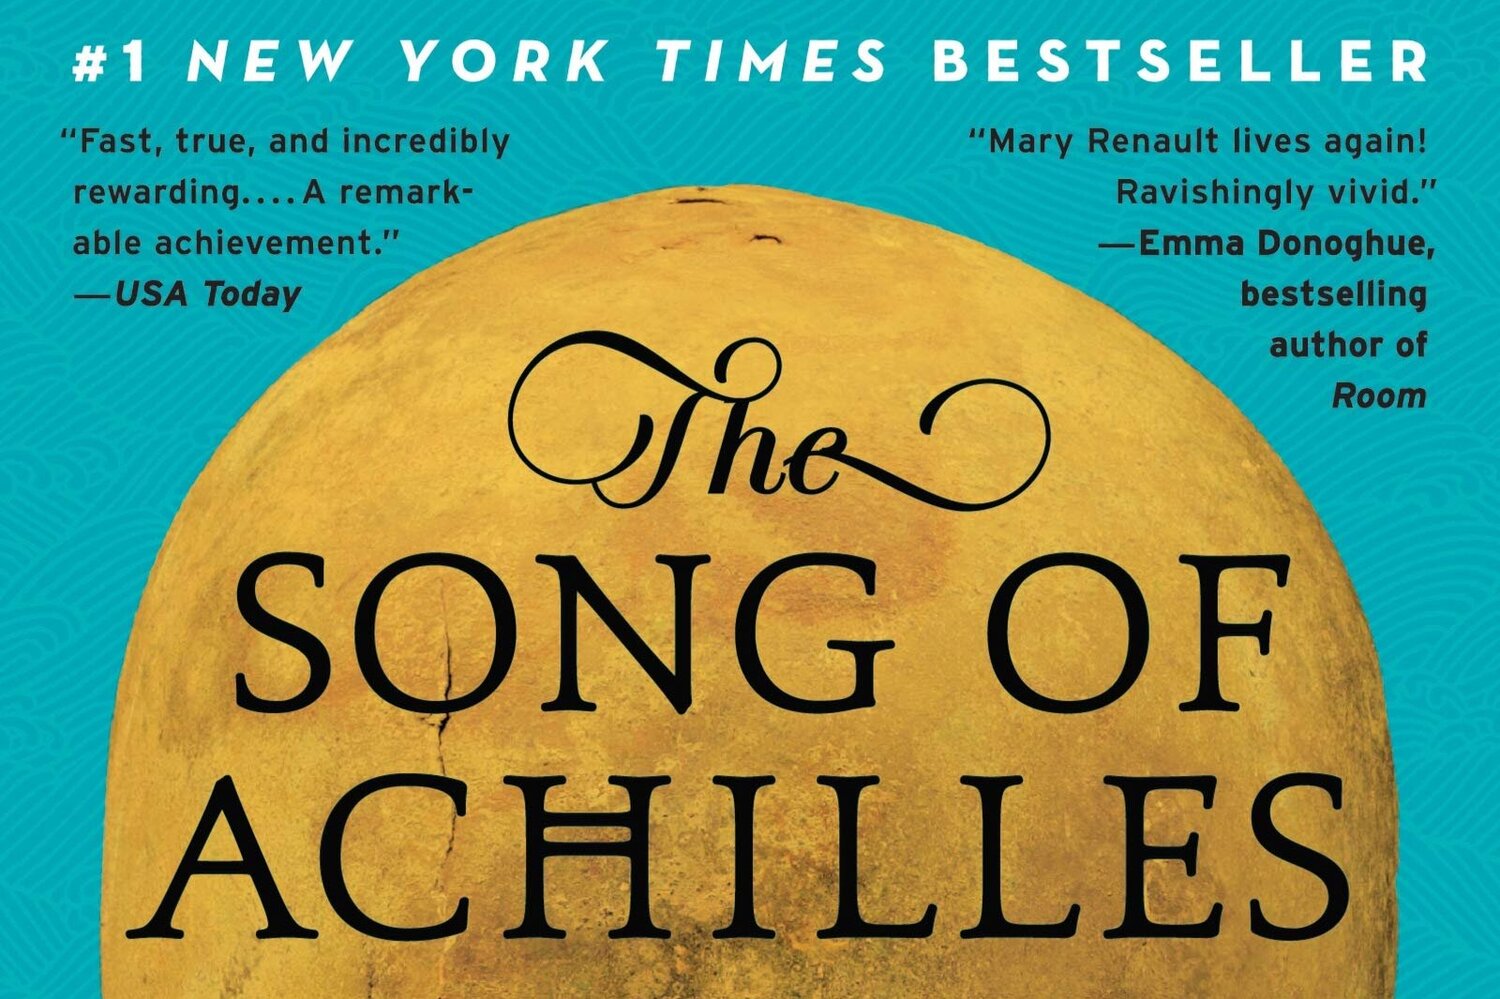 The song of achilles